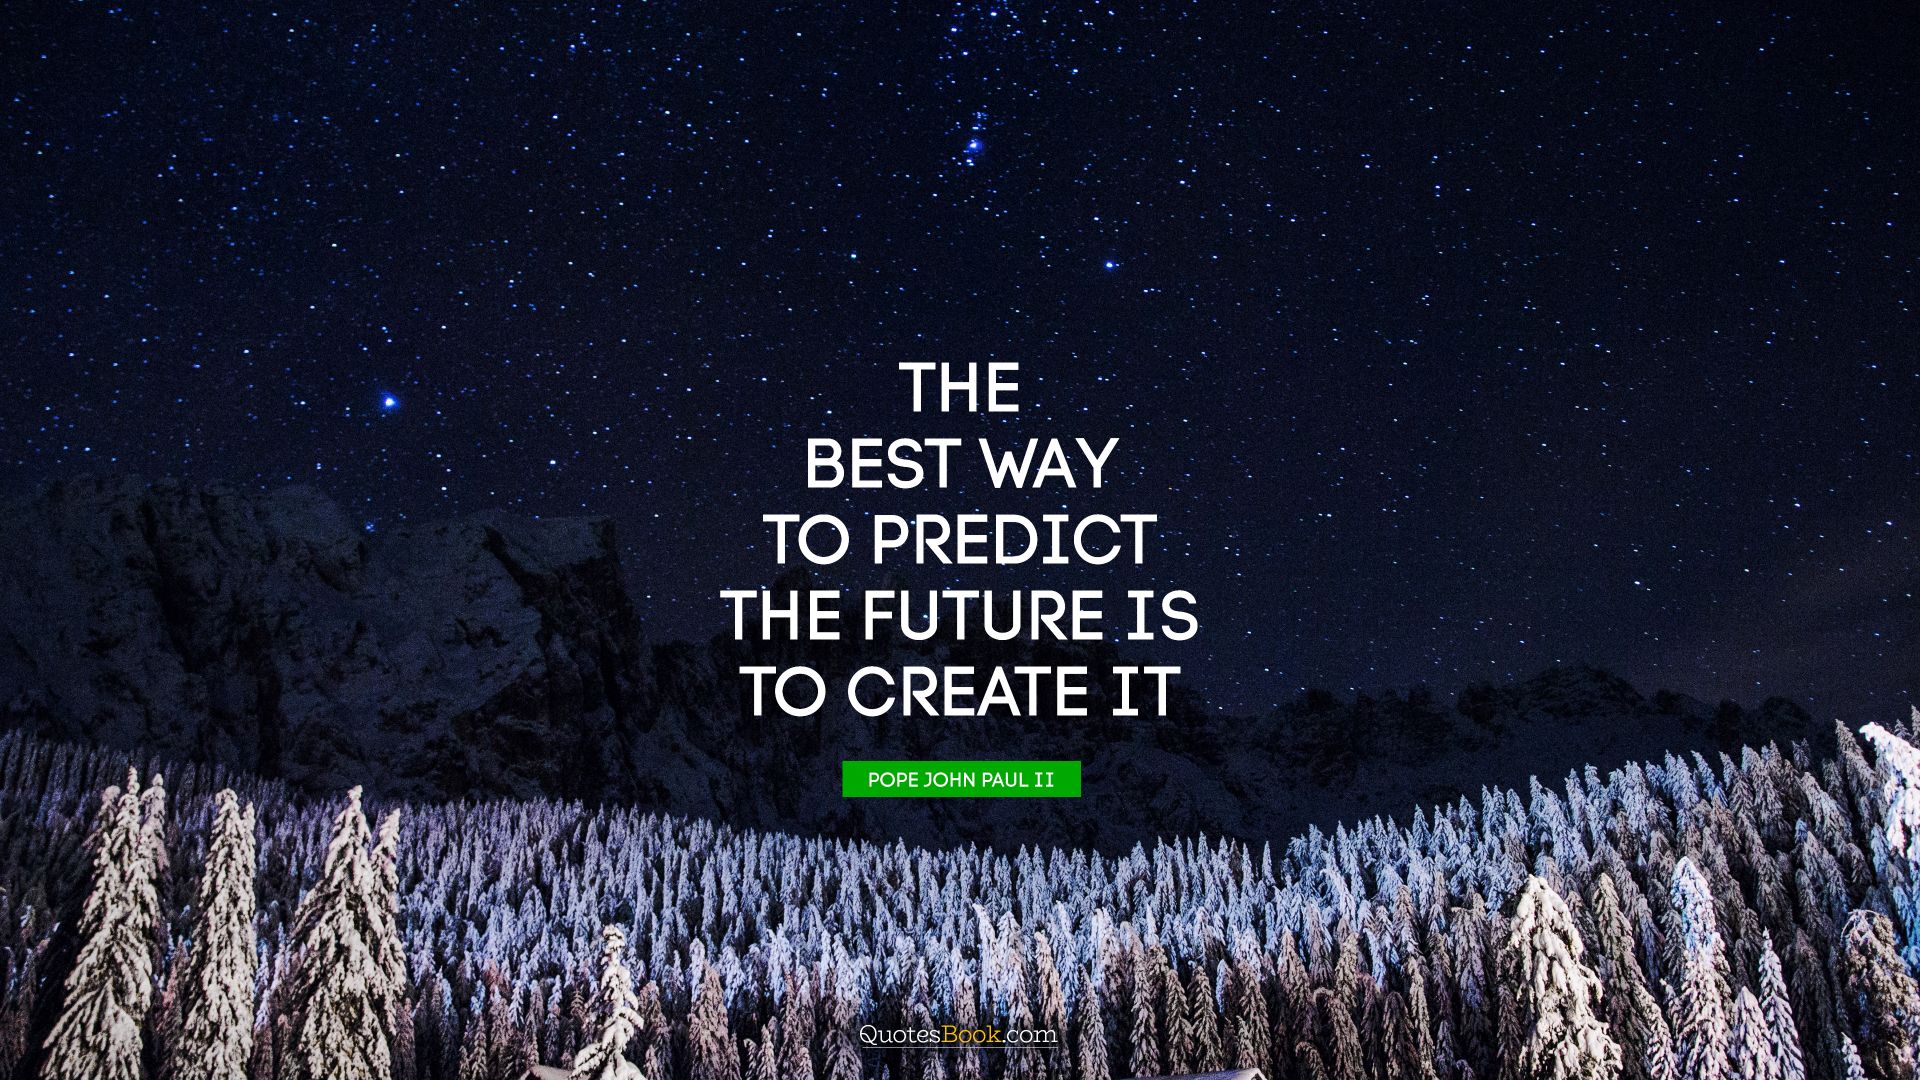 The best way to predict the future is to create it. - Quote by Peter Drucker